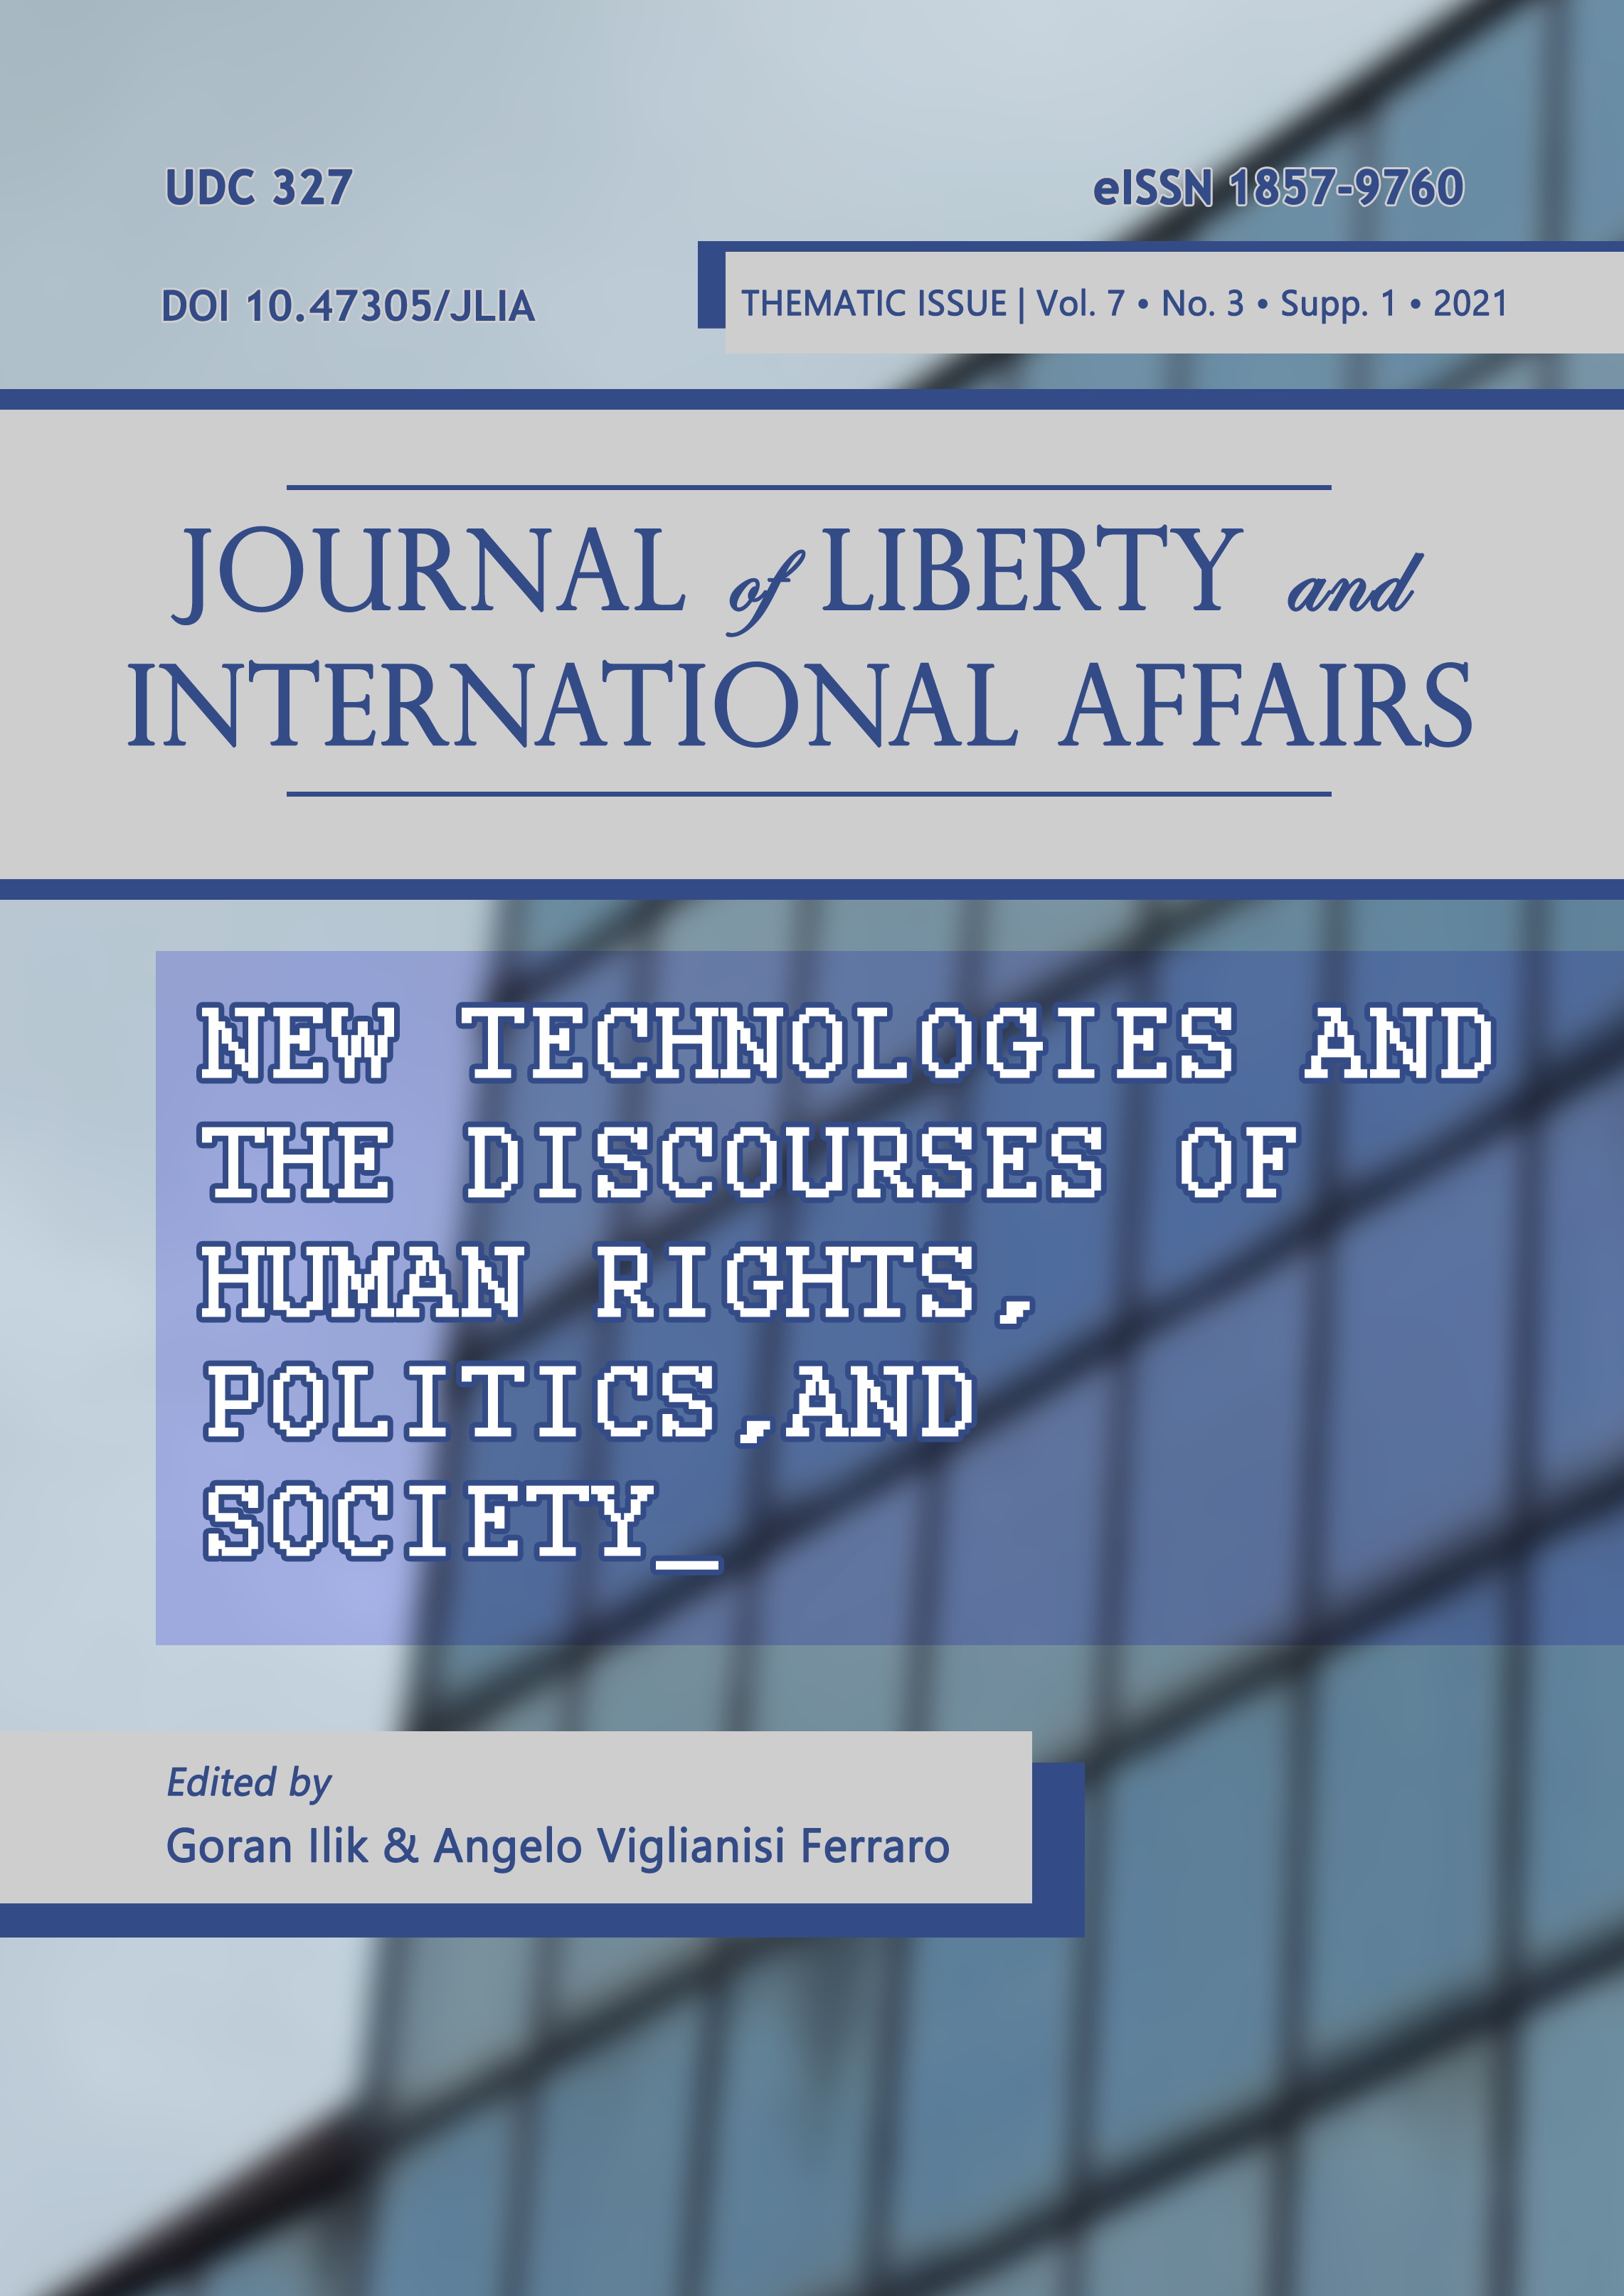 EVALUATION OF TECHNOLOGICAL ADVANCEMENTS AND THEIR FUTURE IMPACT ON EXERCISING OF HUMAN RIGHTS IN SOCIETY AND POLITICS